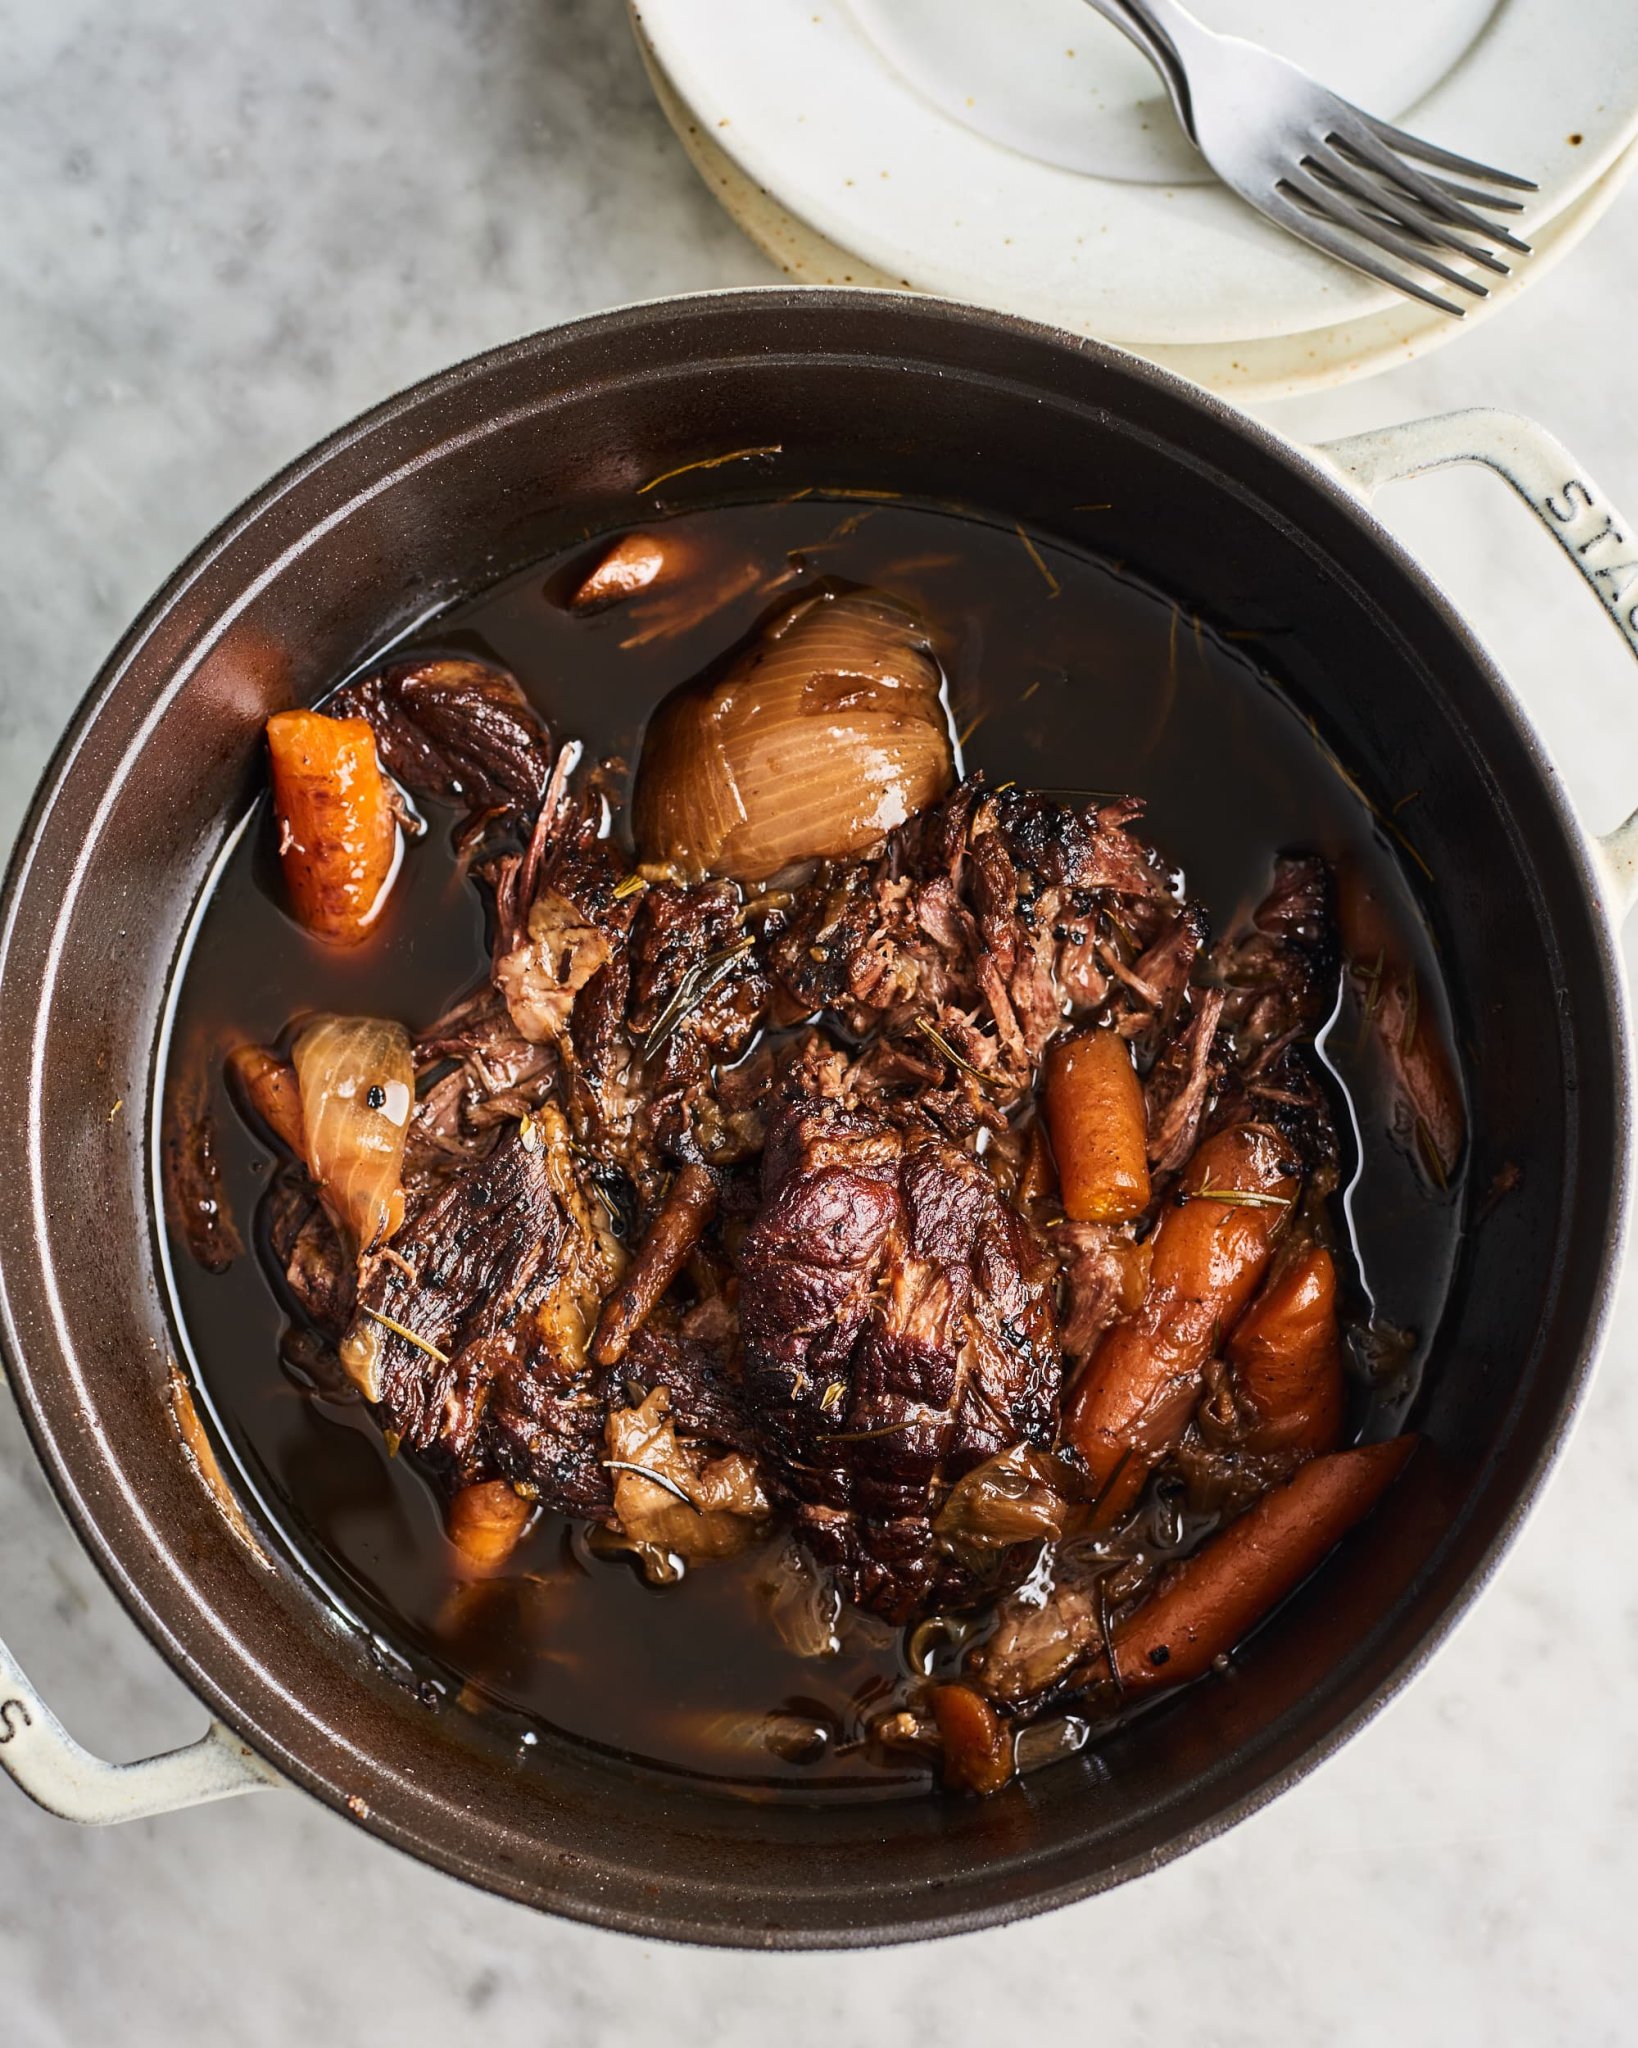 We Tested 4 Famous Pot Roast Recipes and Found a Clear Winner